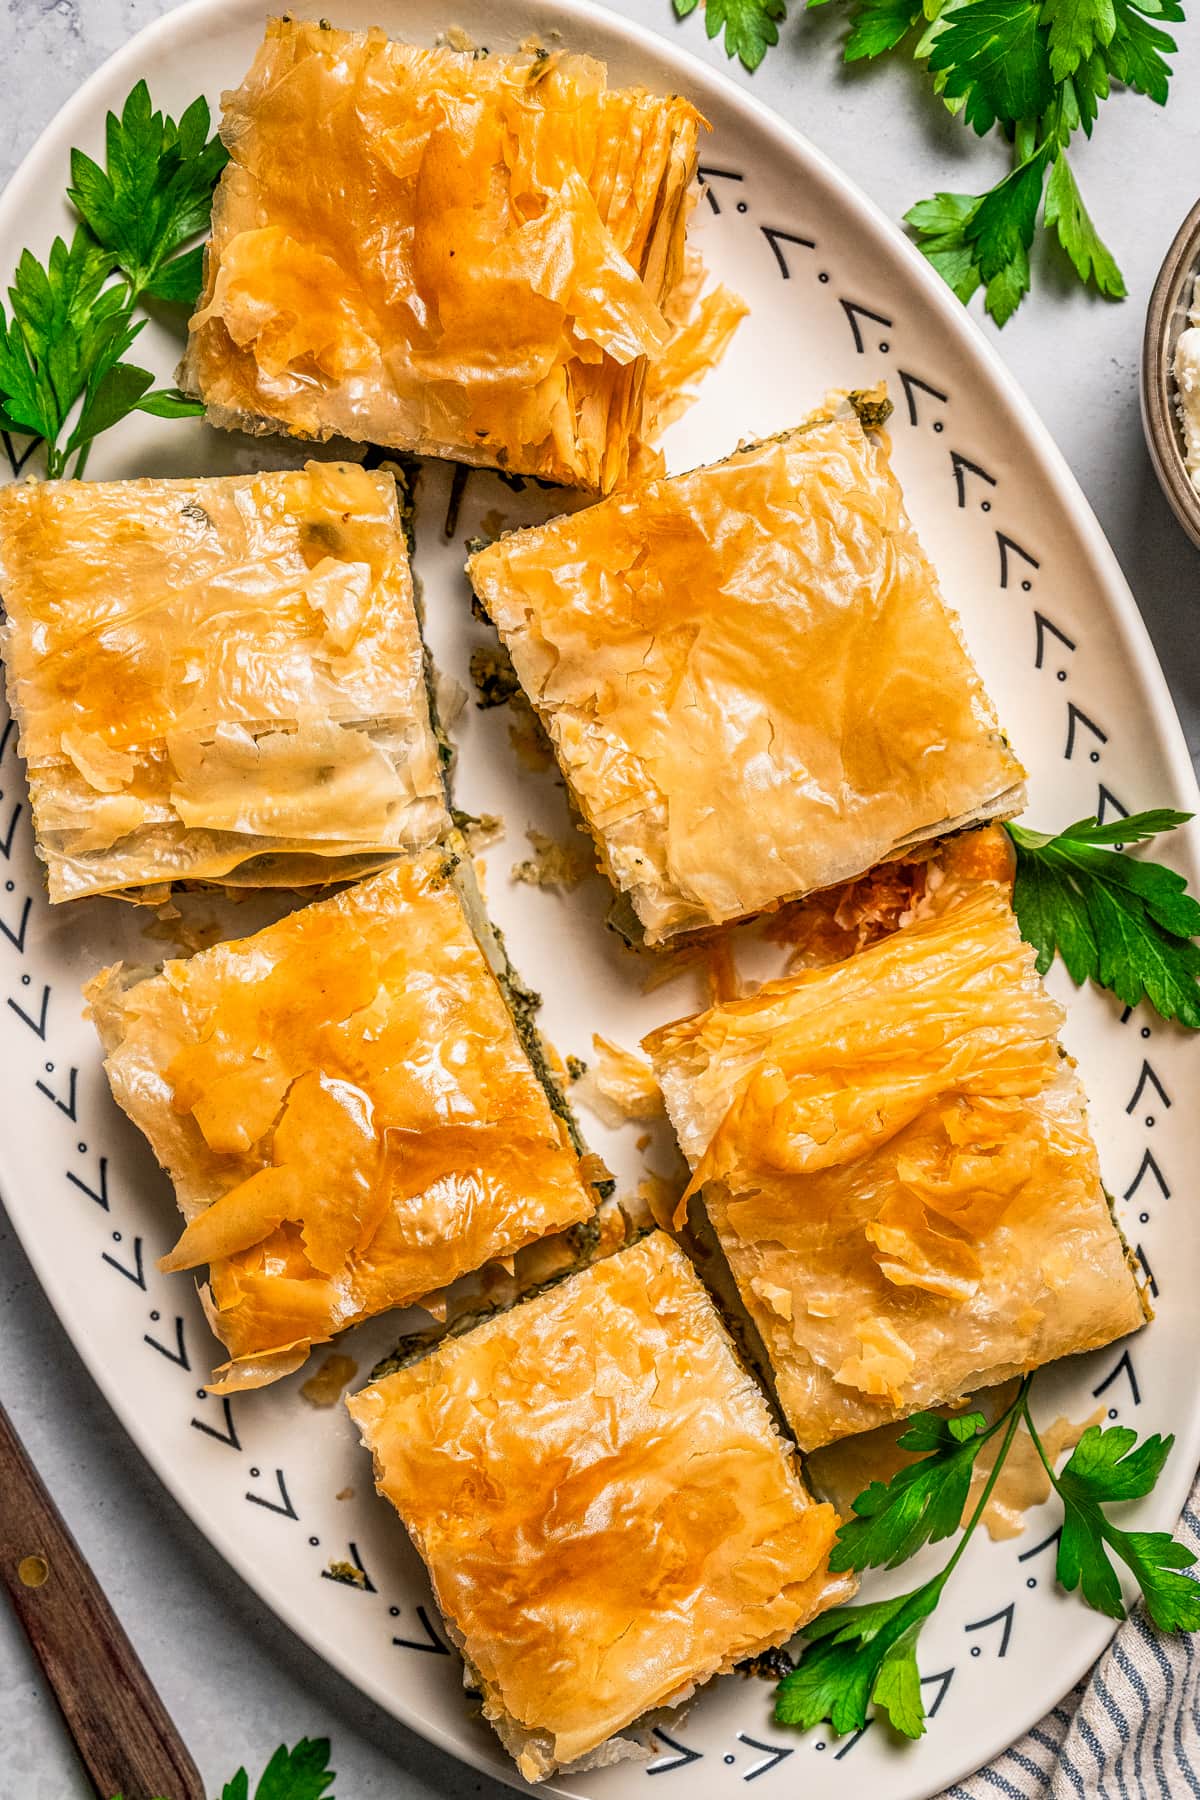 Overhead view of slices of butternut squash and spinach pie arranged on a platter.